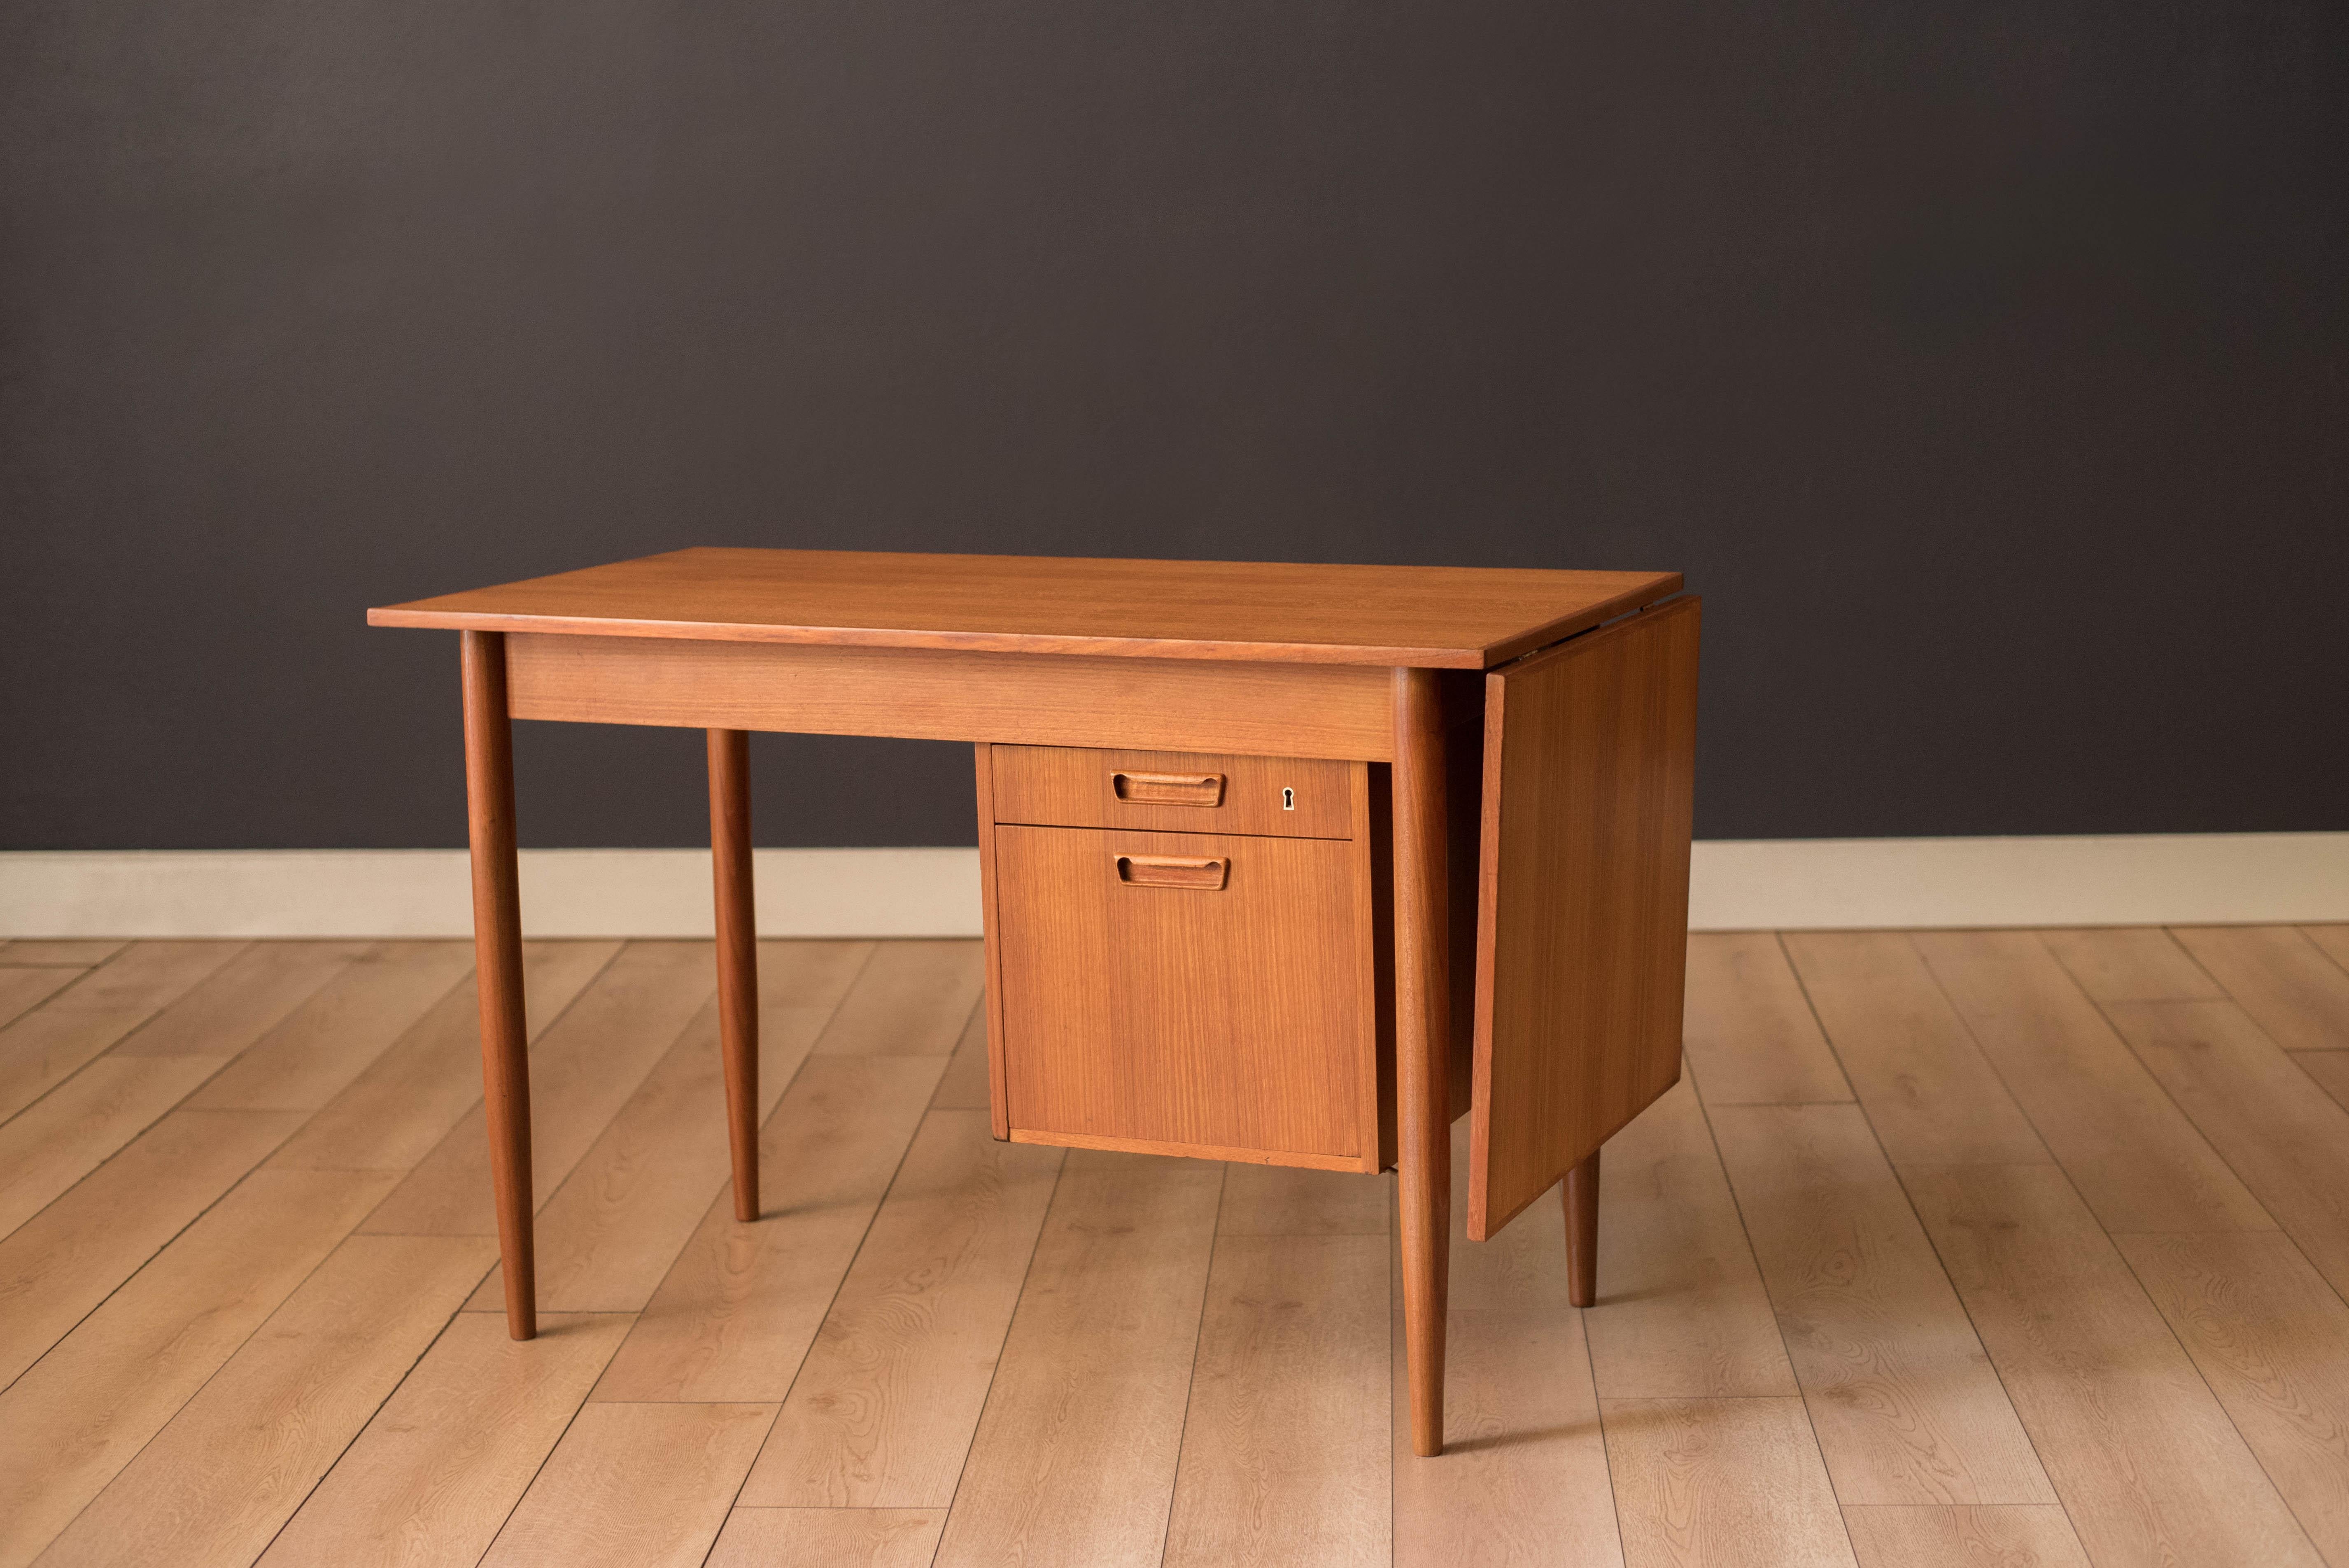 Mid-Century Modern expandable desk in teak designed by Gunnar Nielsen Tibergaard, Denmark. This versatile piece features brass hardware and includes one extension drop leaf that conveniently slides over to increase your work surface space. Equipped